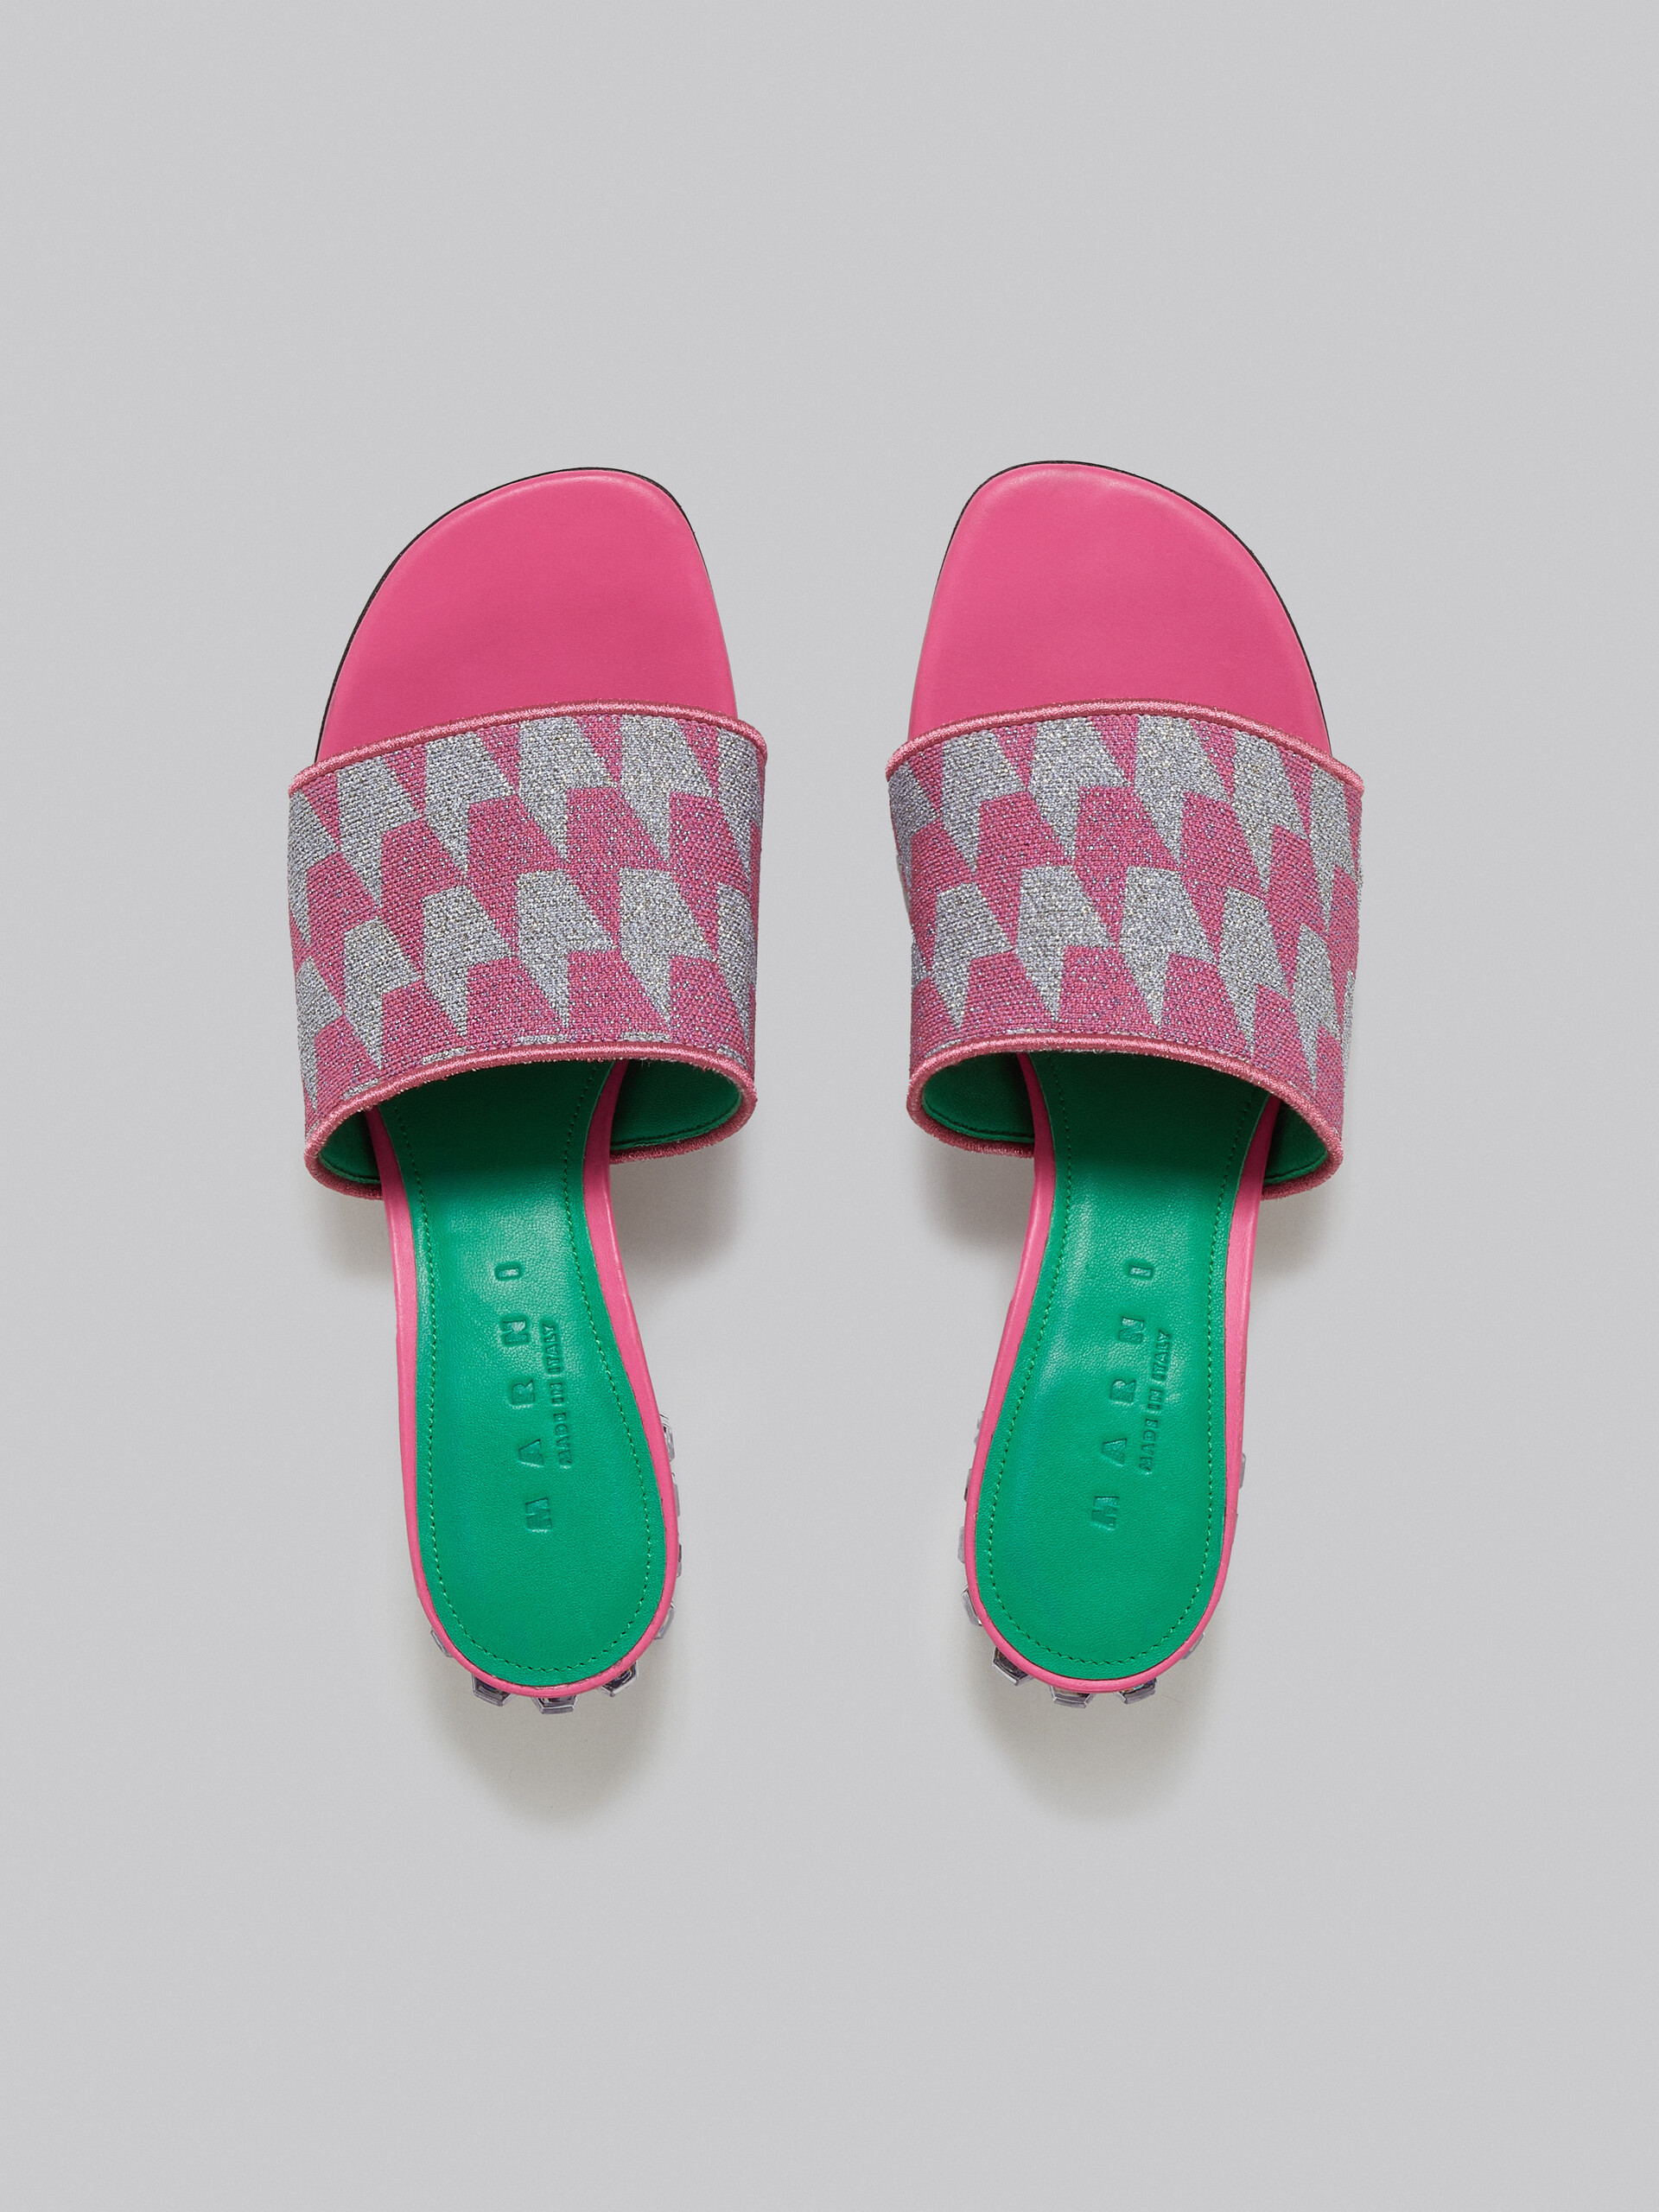 Lurex pink and silver sabot with houndstooth motif - Sandals - Image 4